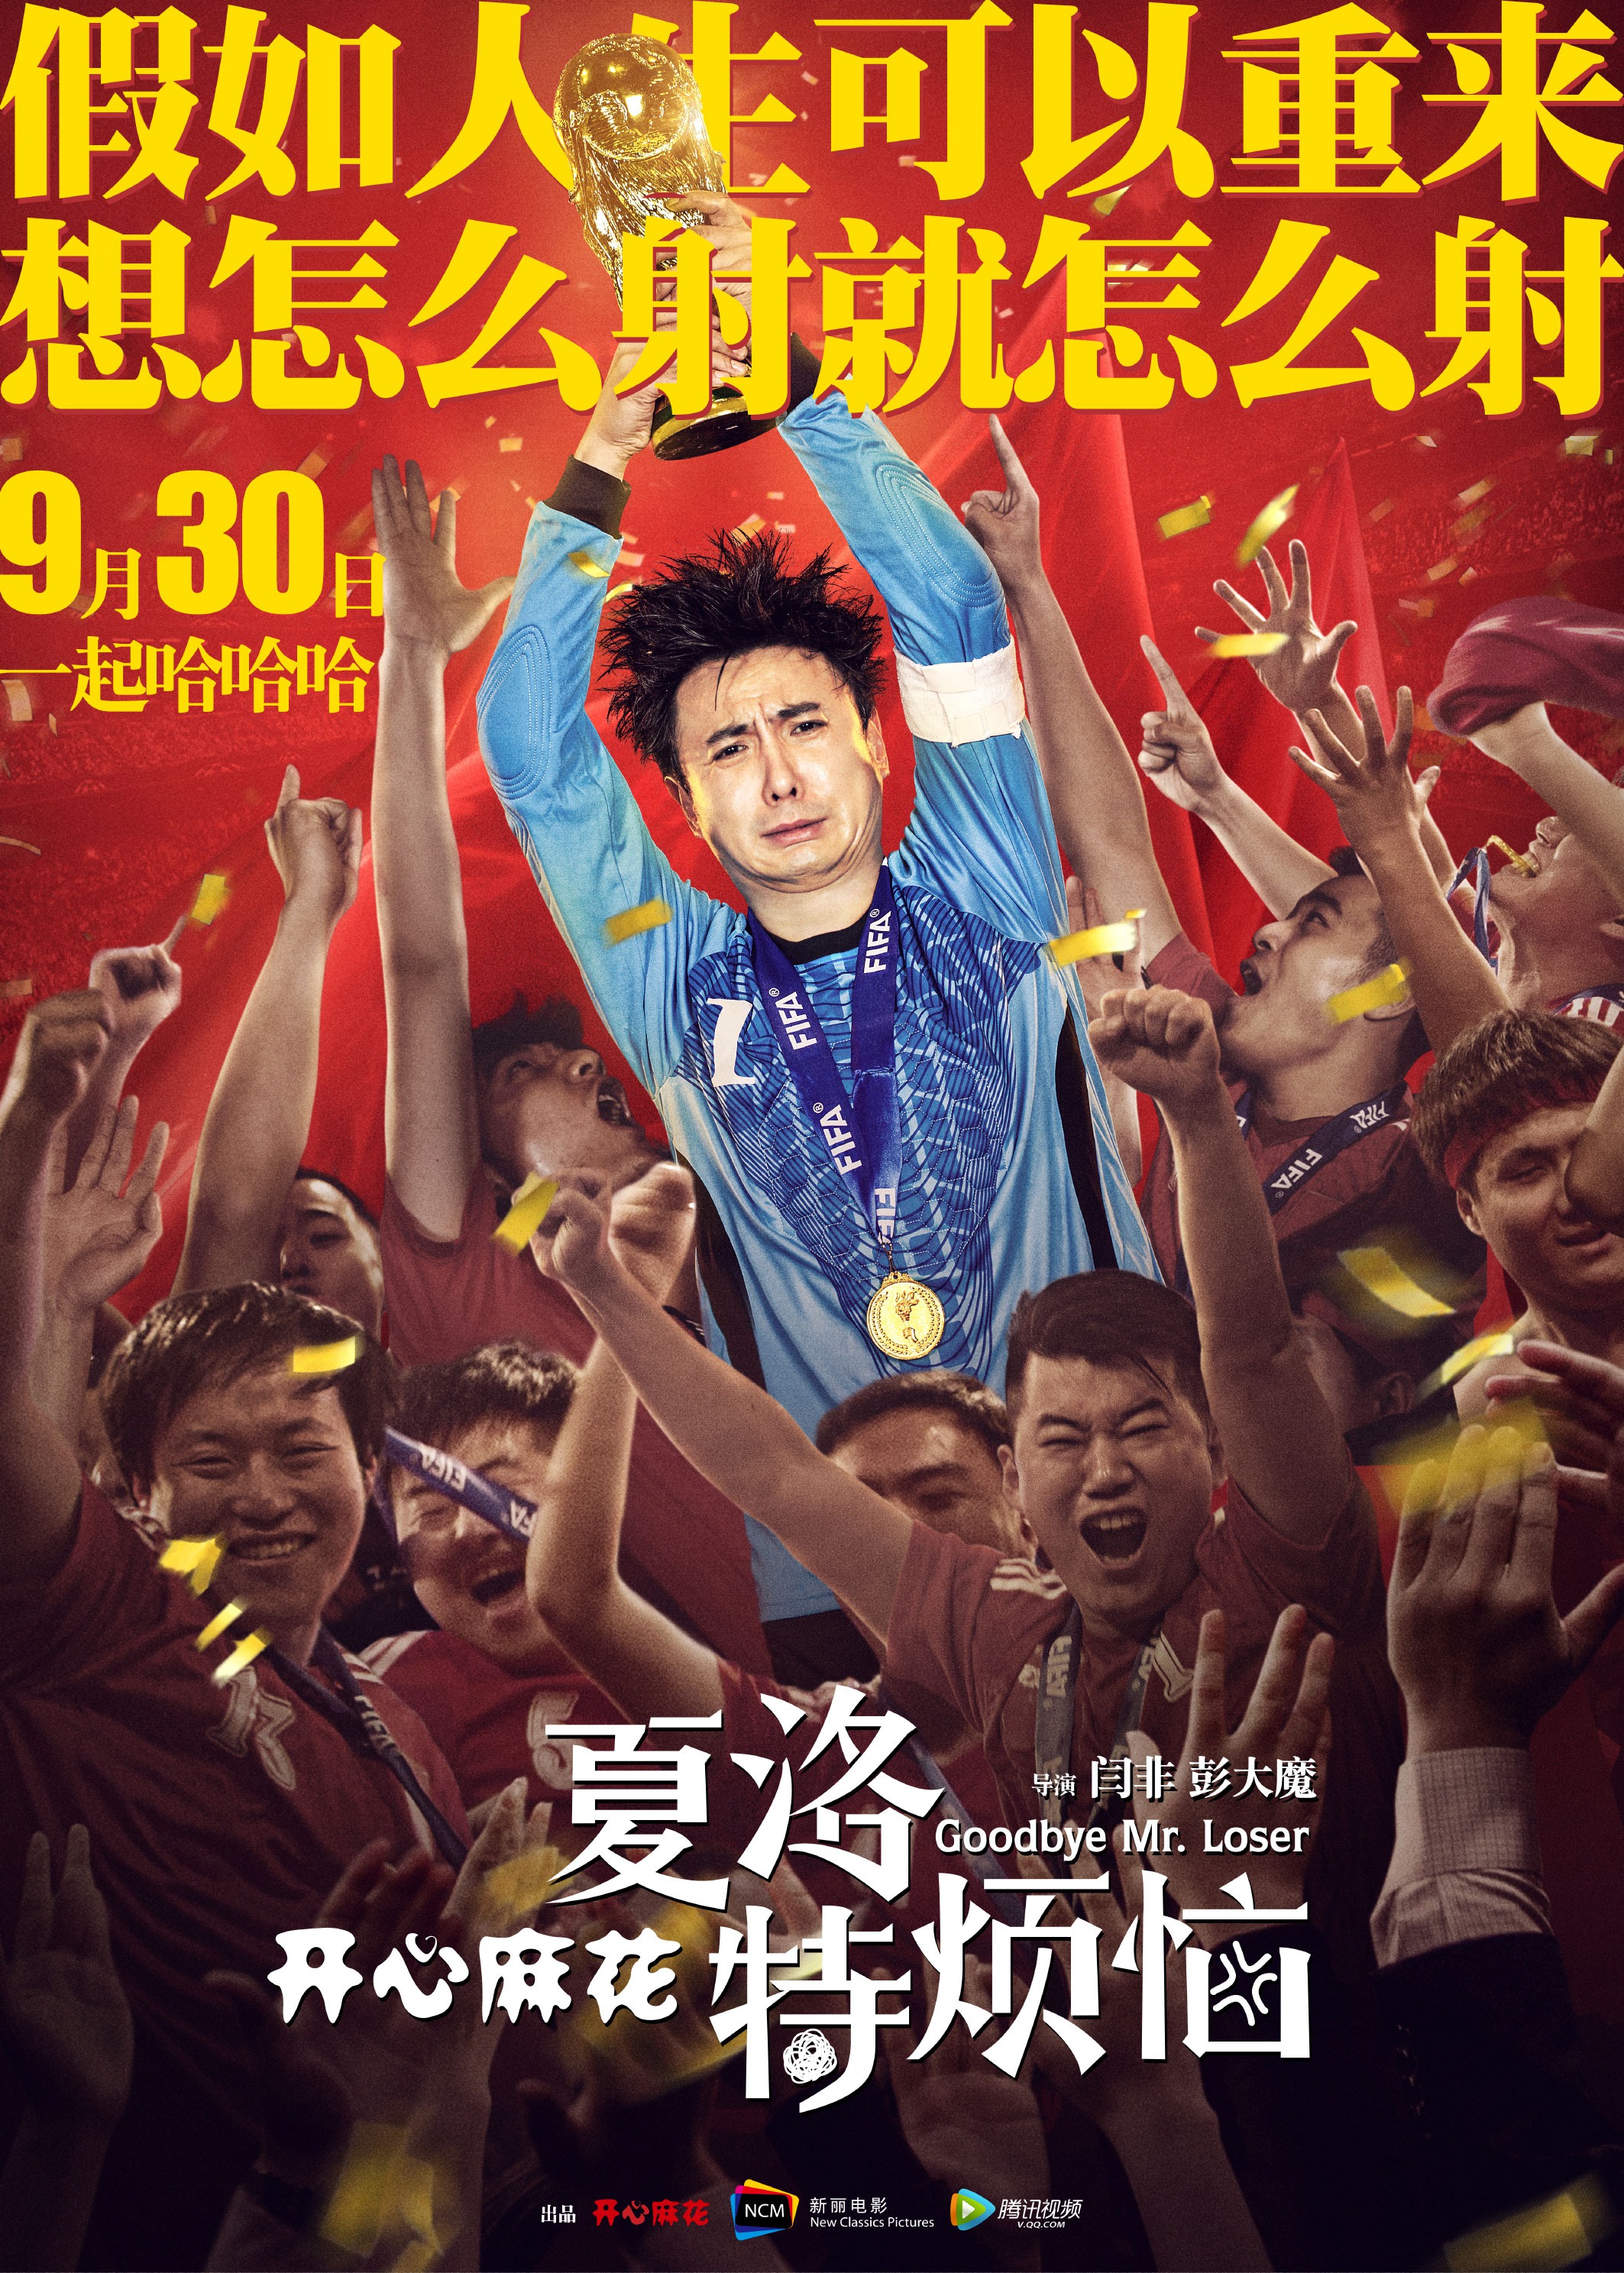 Mega Sized Movie Poster Image for Xia Luo te fan nao (#3 of 4)